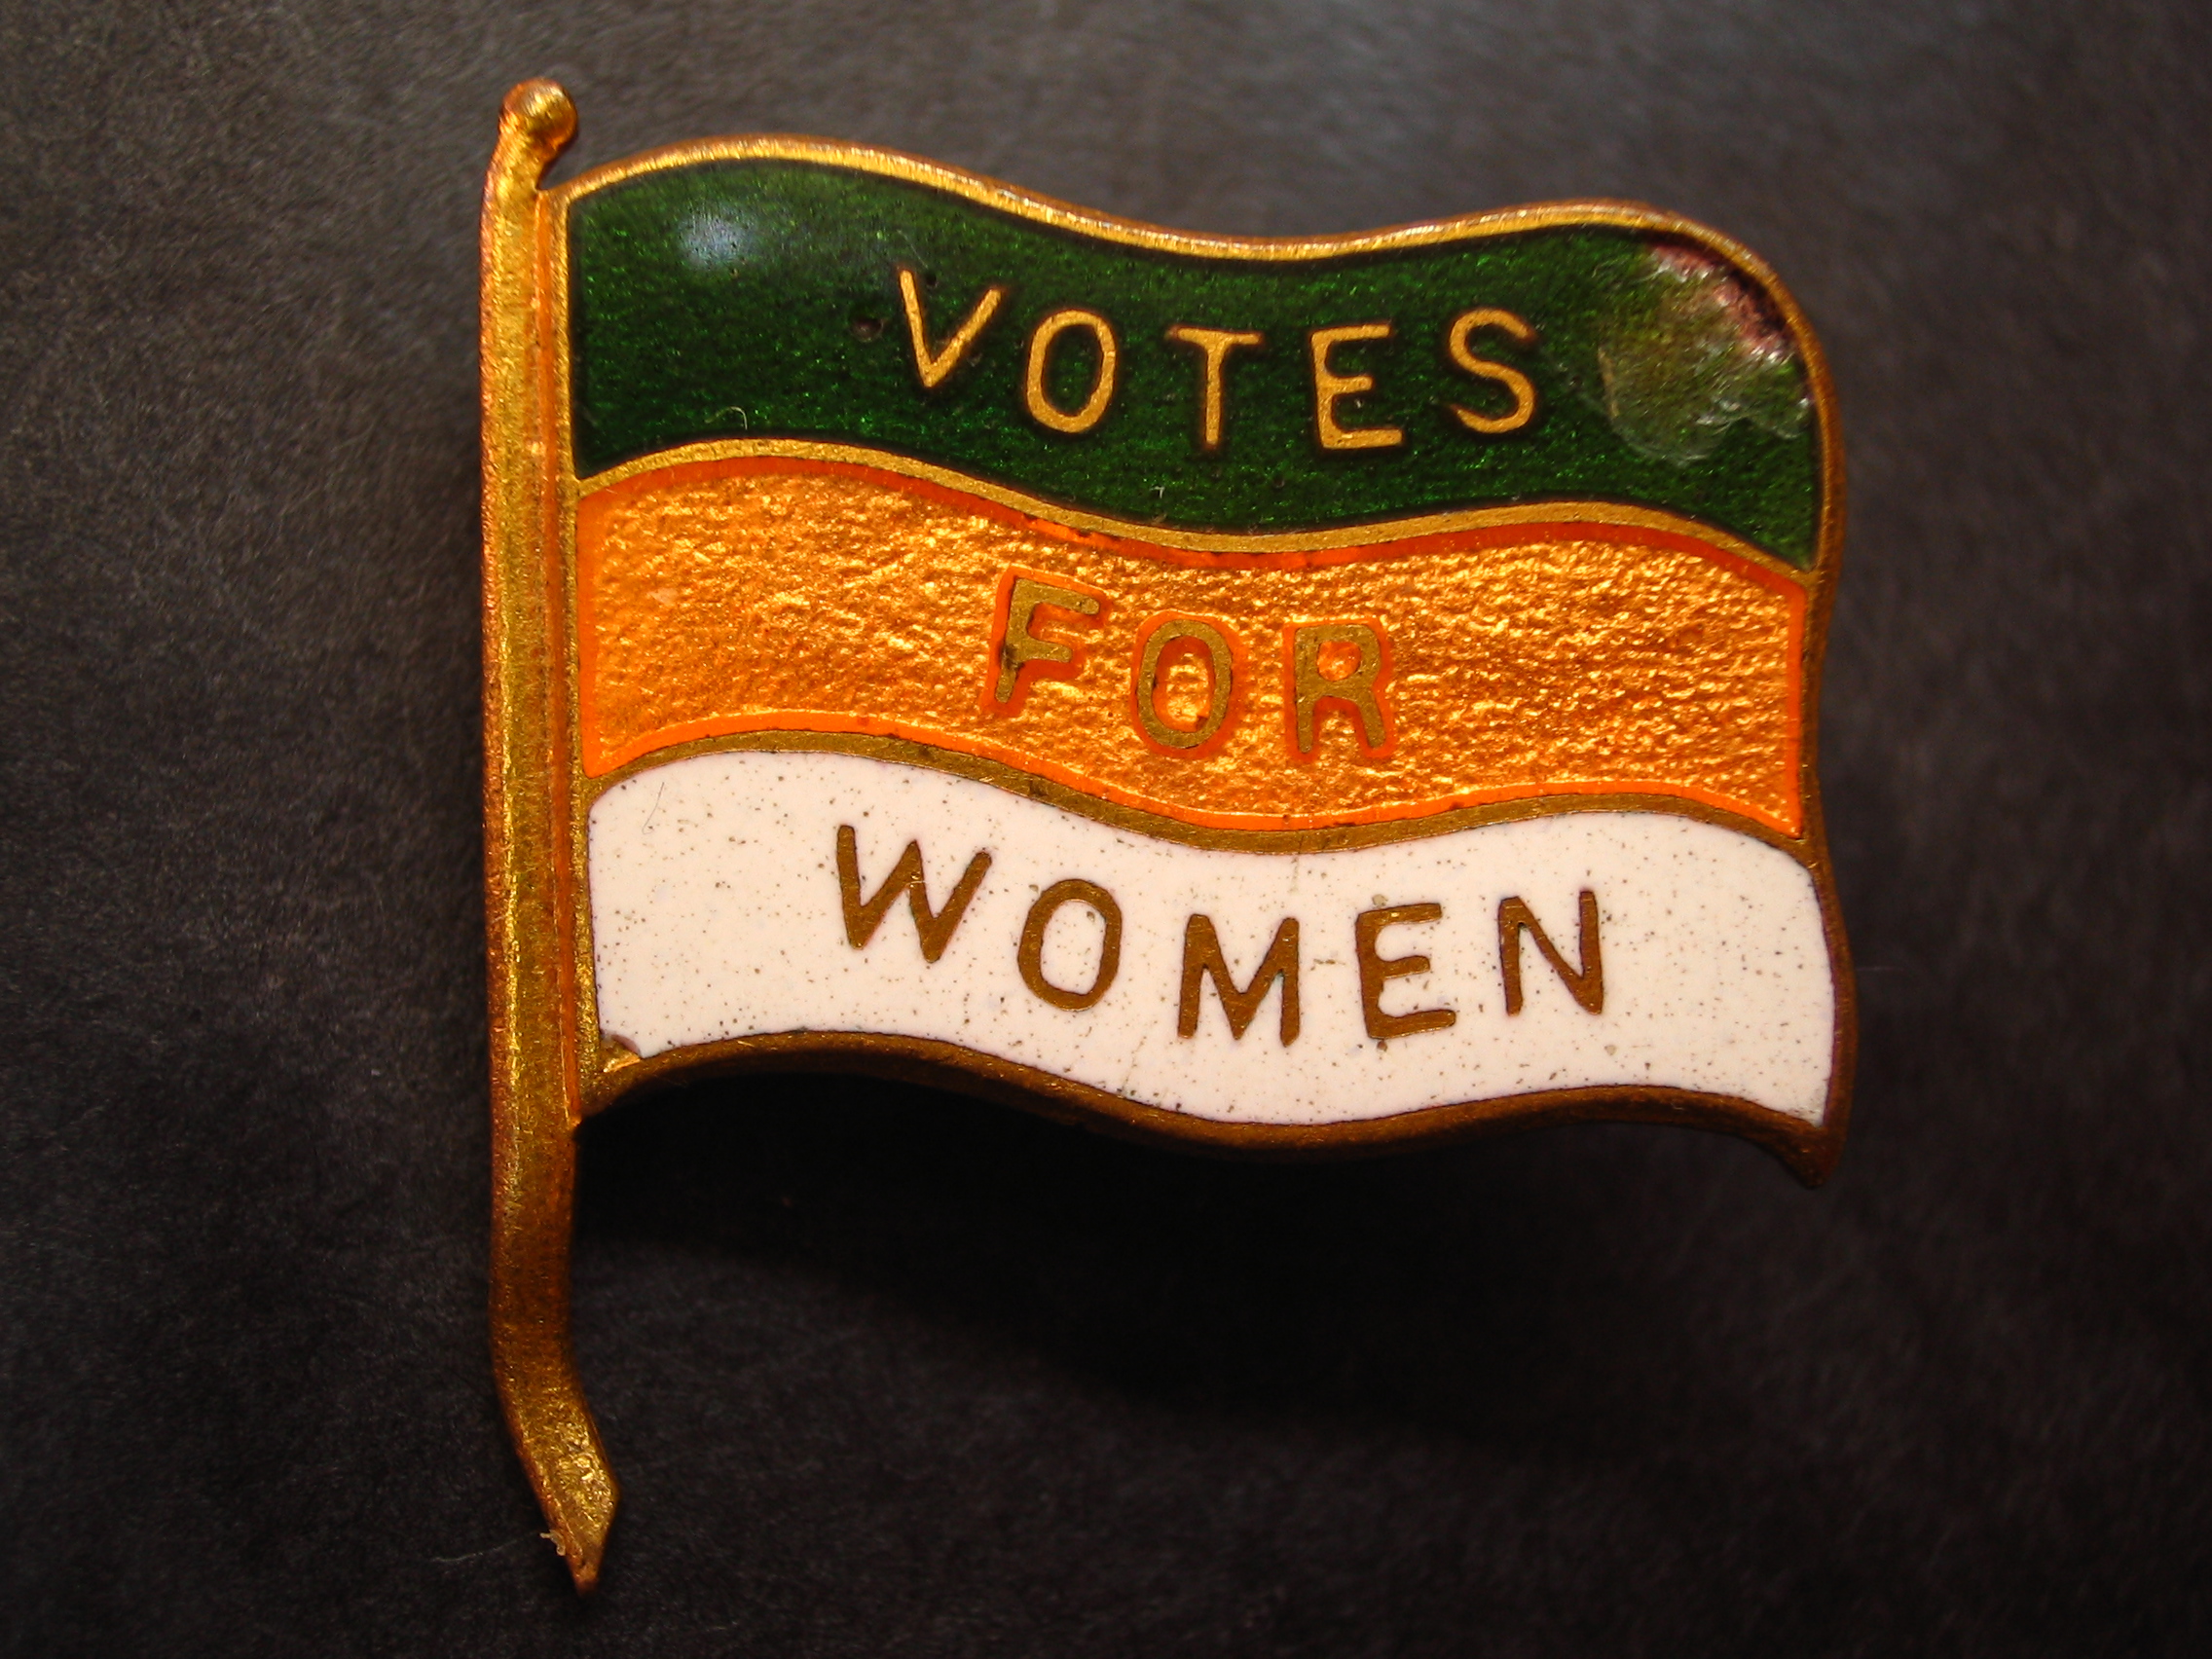 List of suffragists and suffragettes